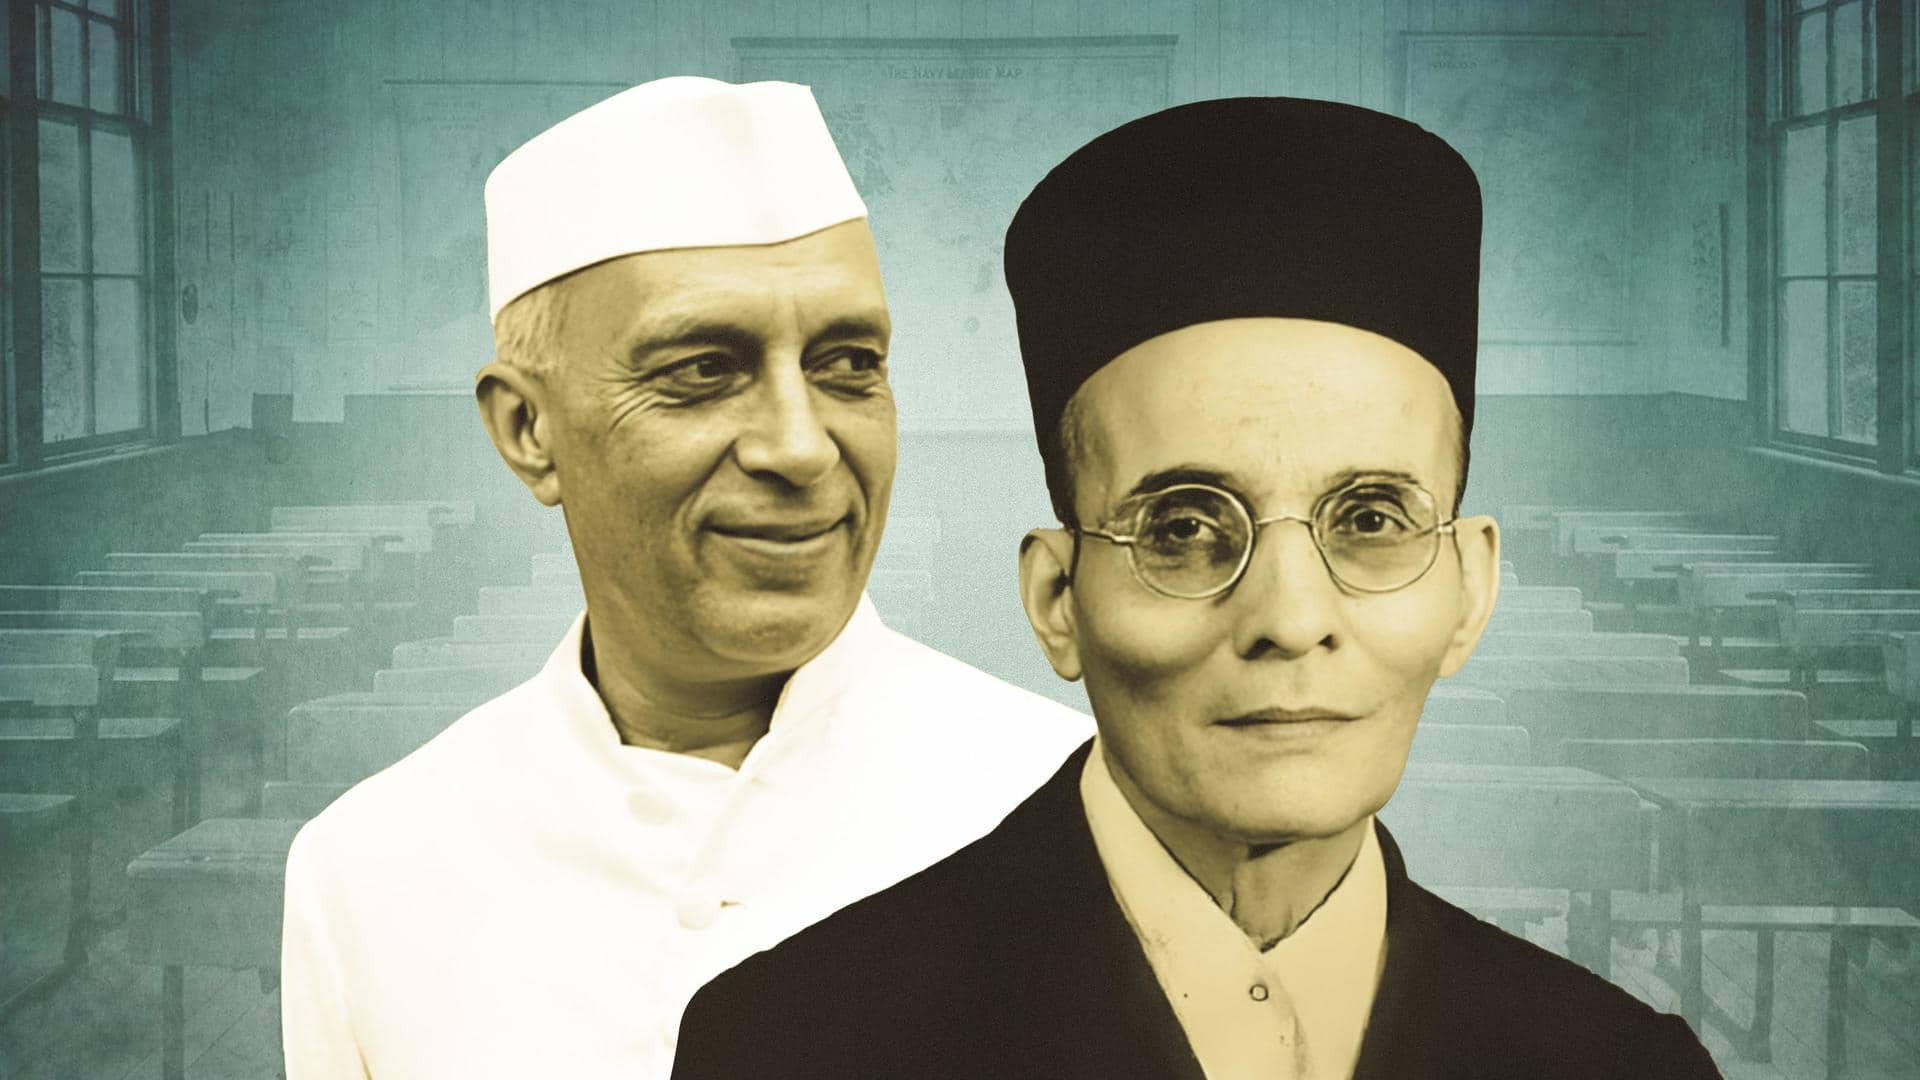 UP syllabus: Savarkar added, Nehru excluded from 'great leaders' list